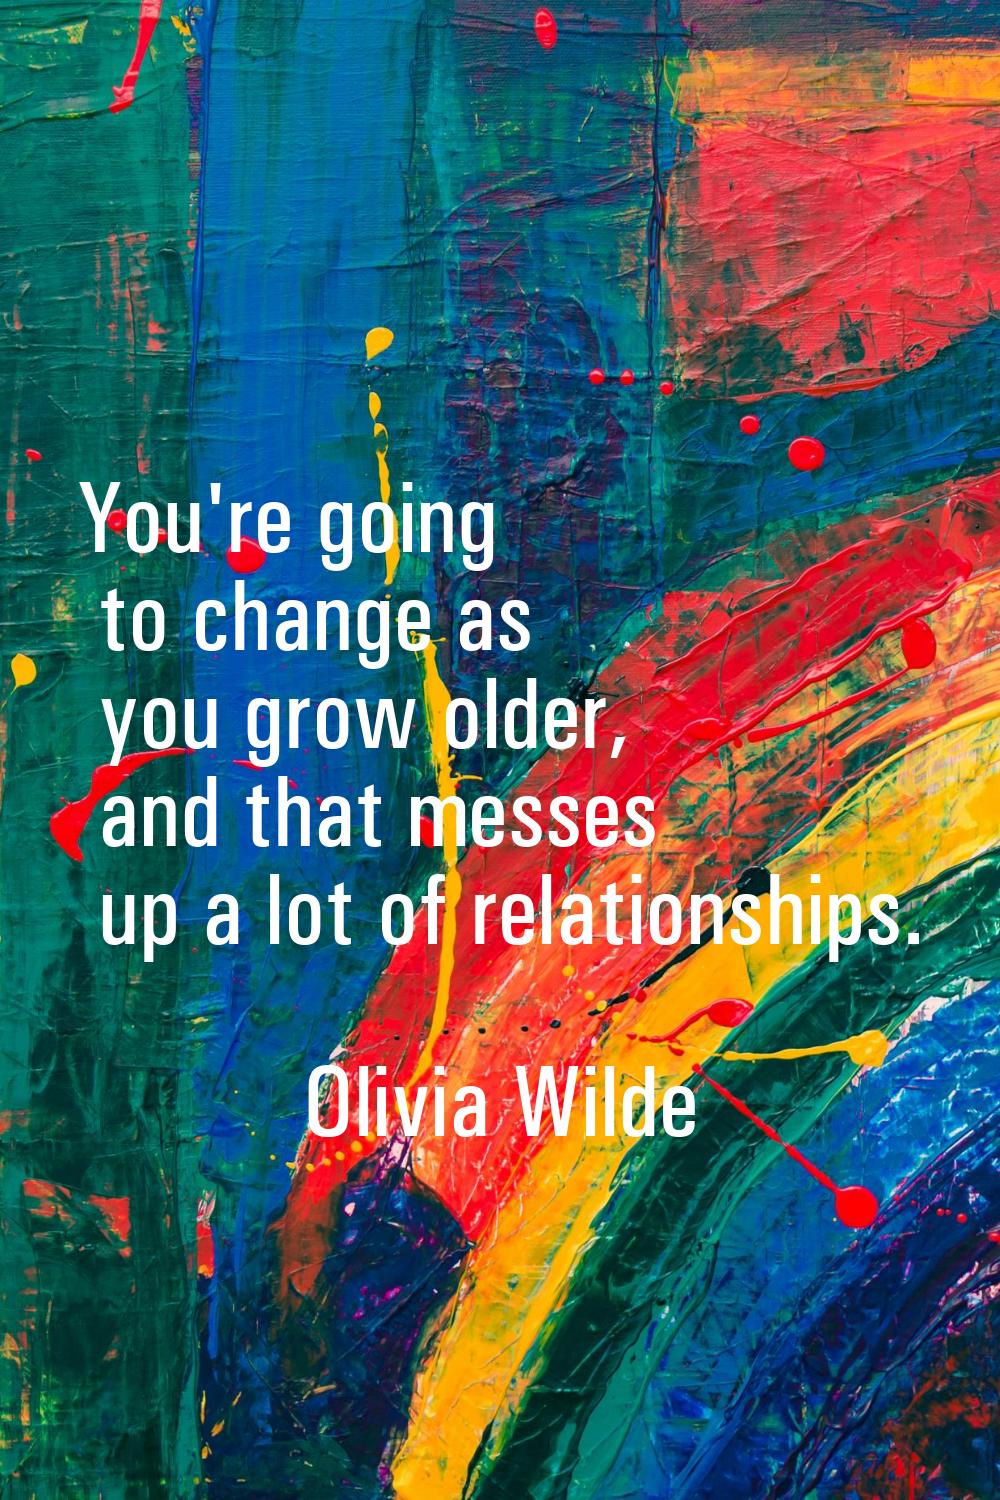 You're going to change as you grow older, and that messes up a lot of relationships.